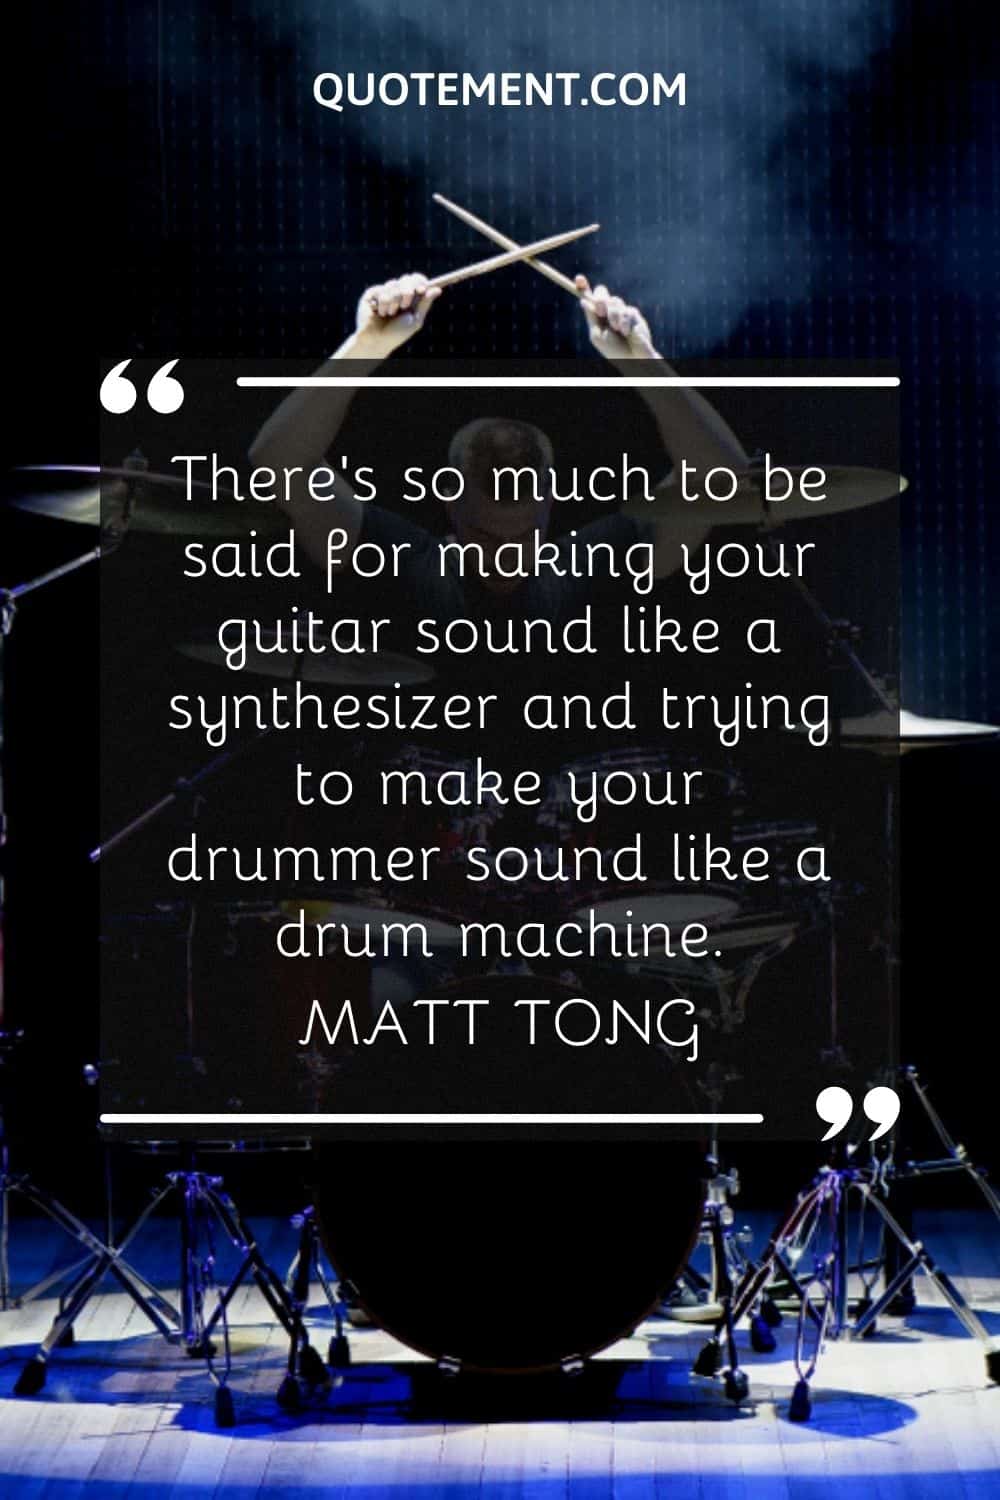 There's so much to be said for making your guitar sound like a synthesizer and trying to make your drummer sound like a drum machine